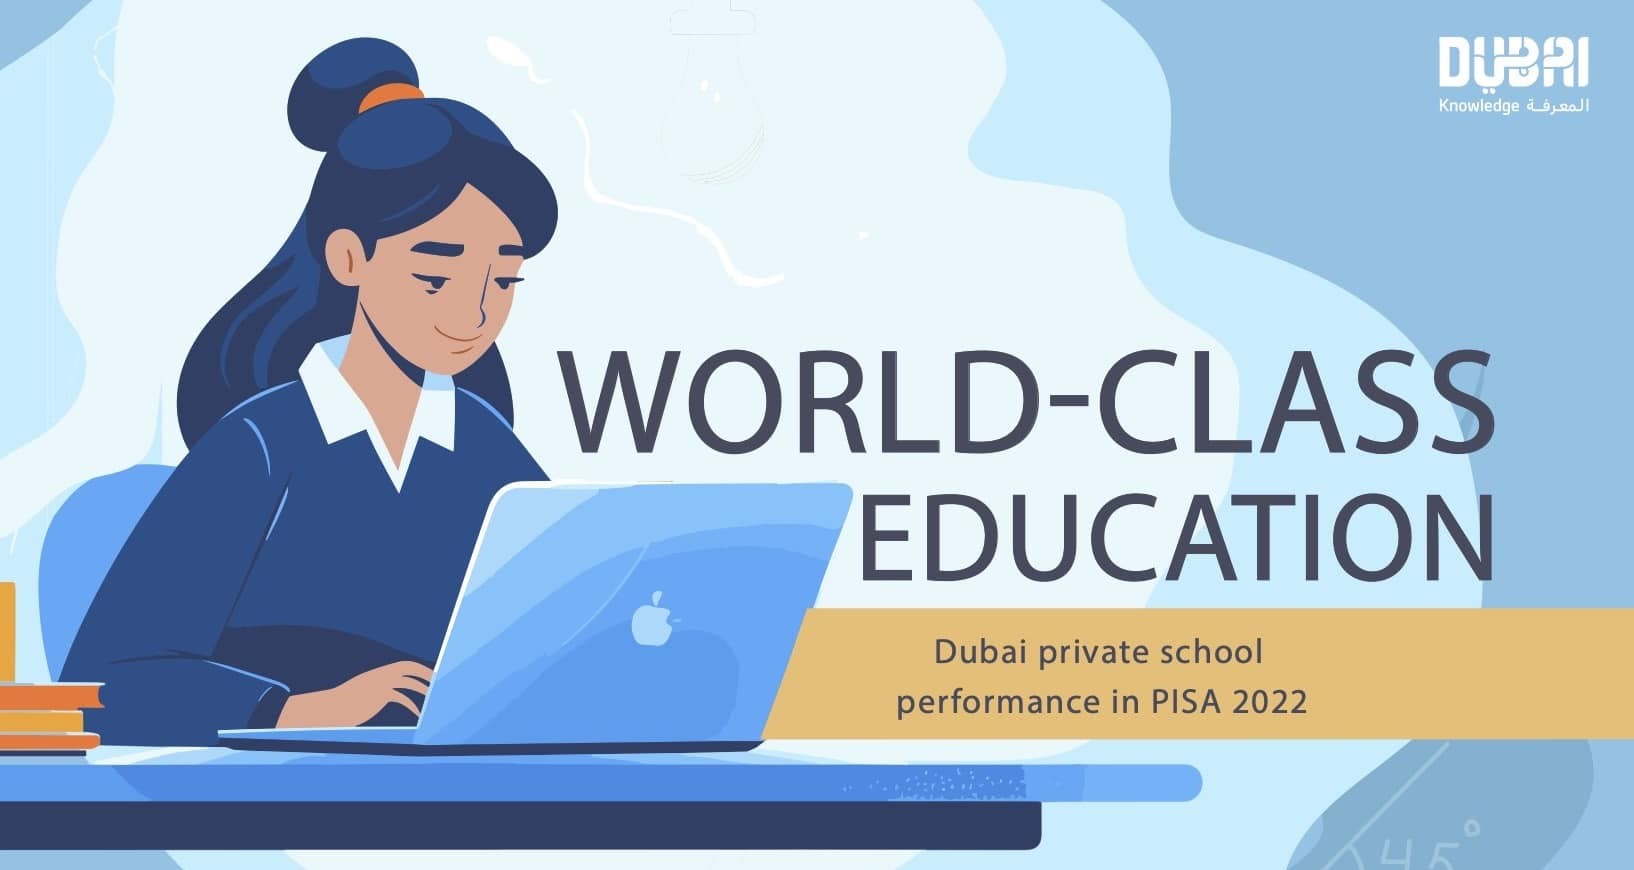 Dubai's private schools ranked among the top 14 in the world for proficiency in mathematics, science, and reading-edcare.ae